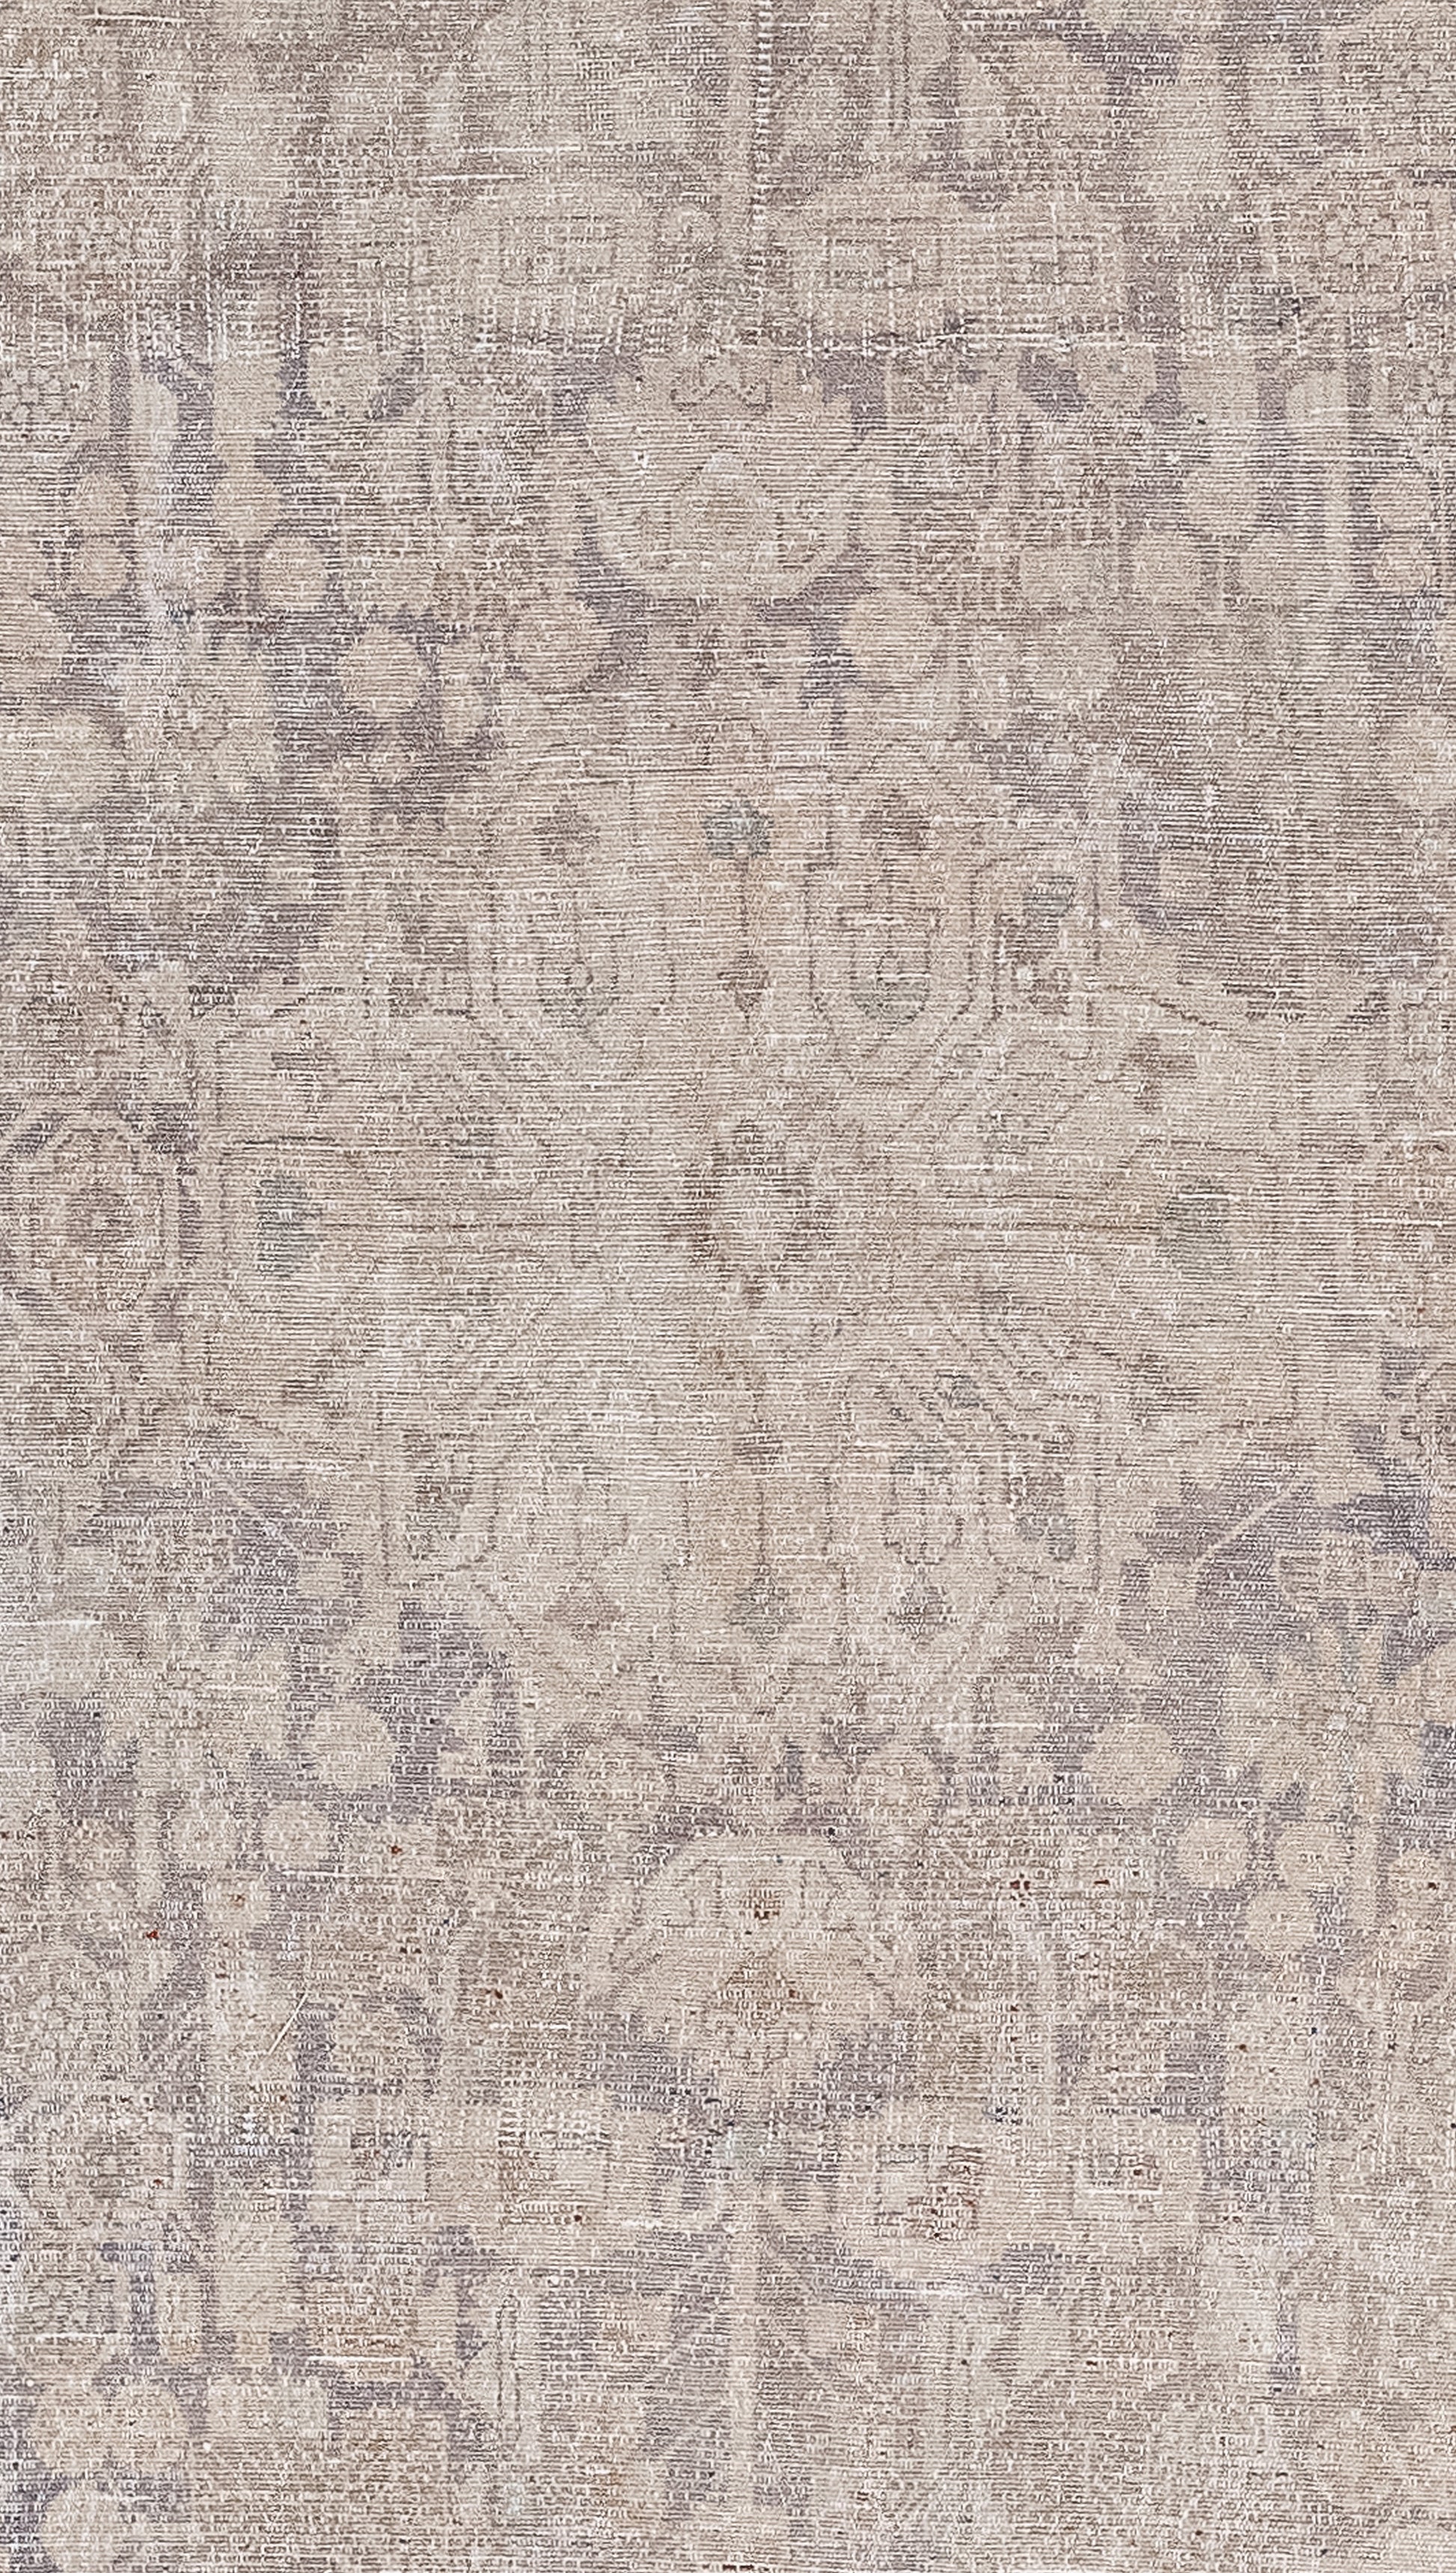 The rug's close-up features a ninja star with nested abstract shapes and circuits.